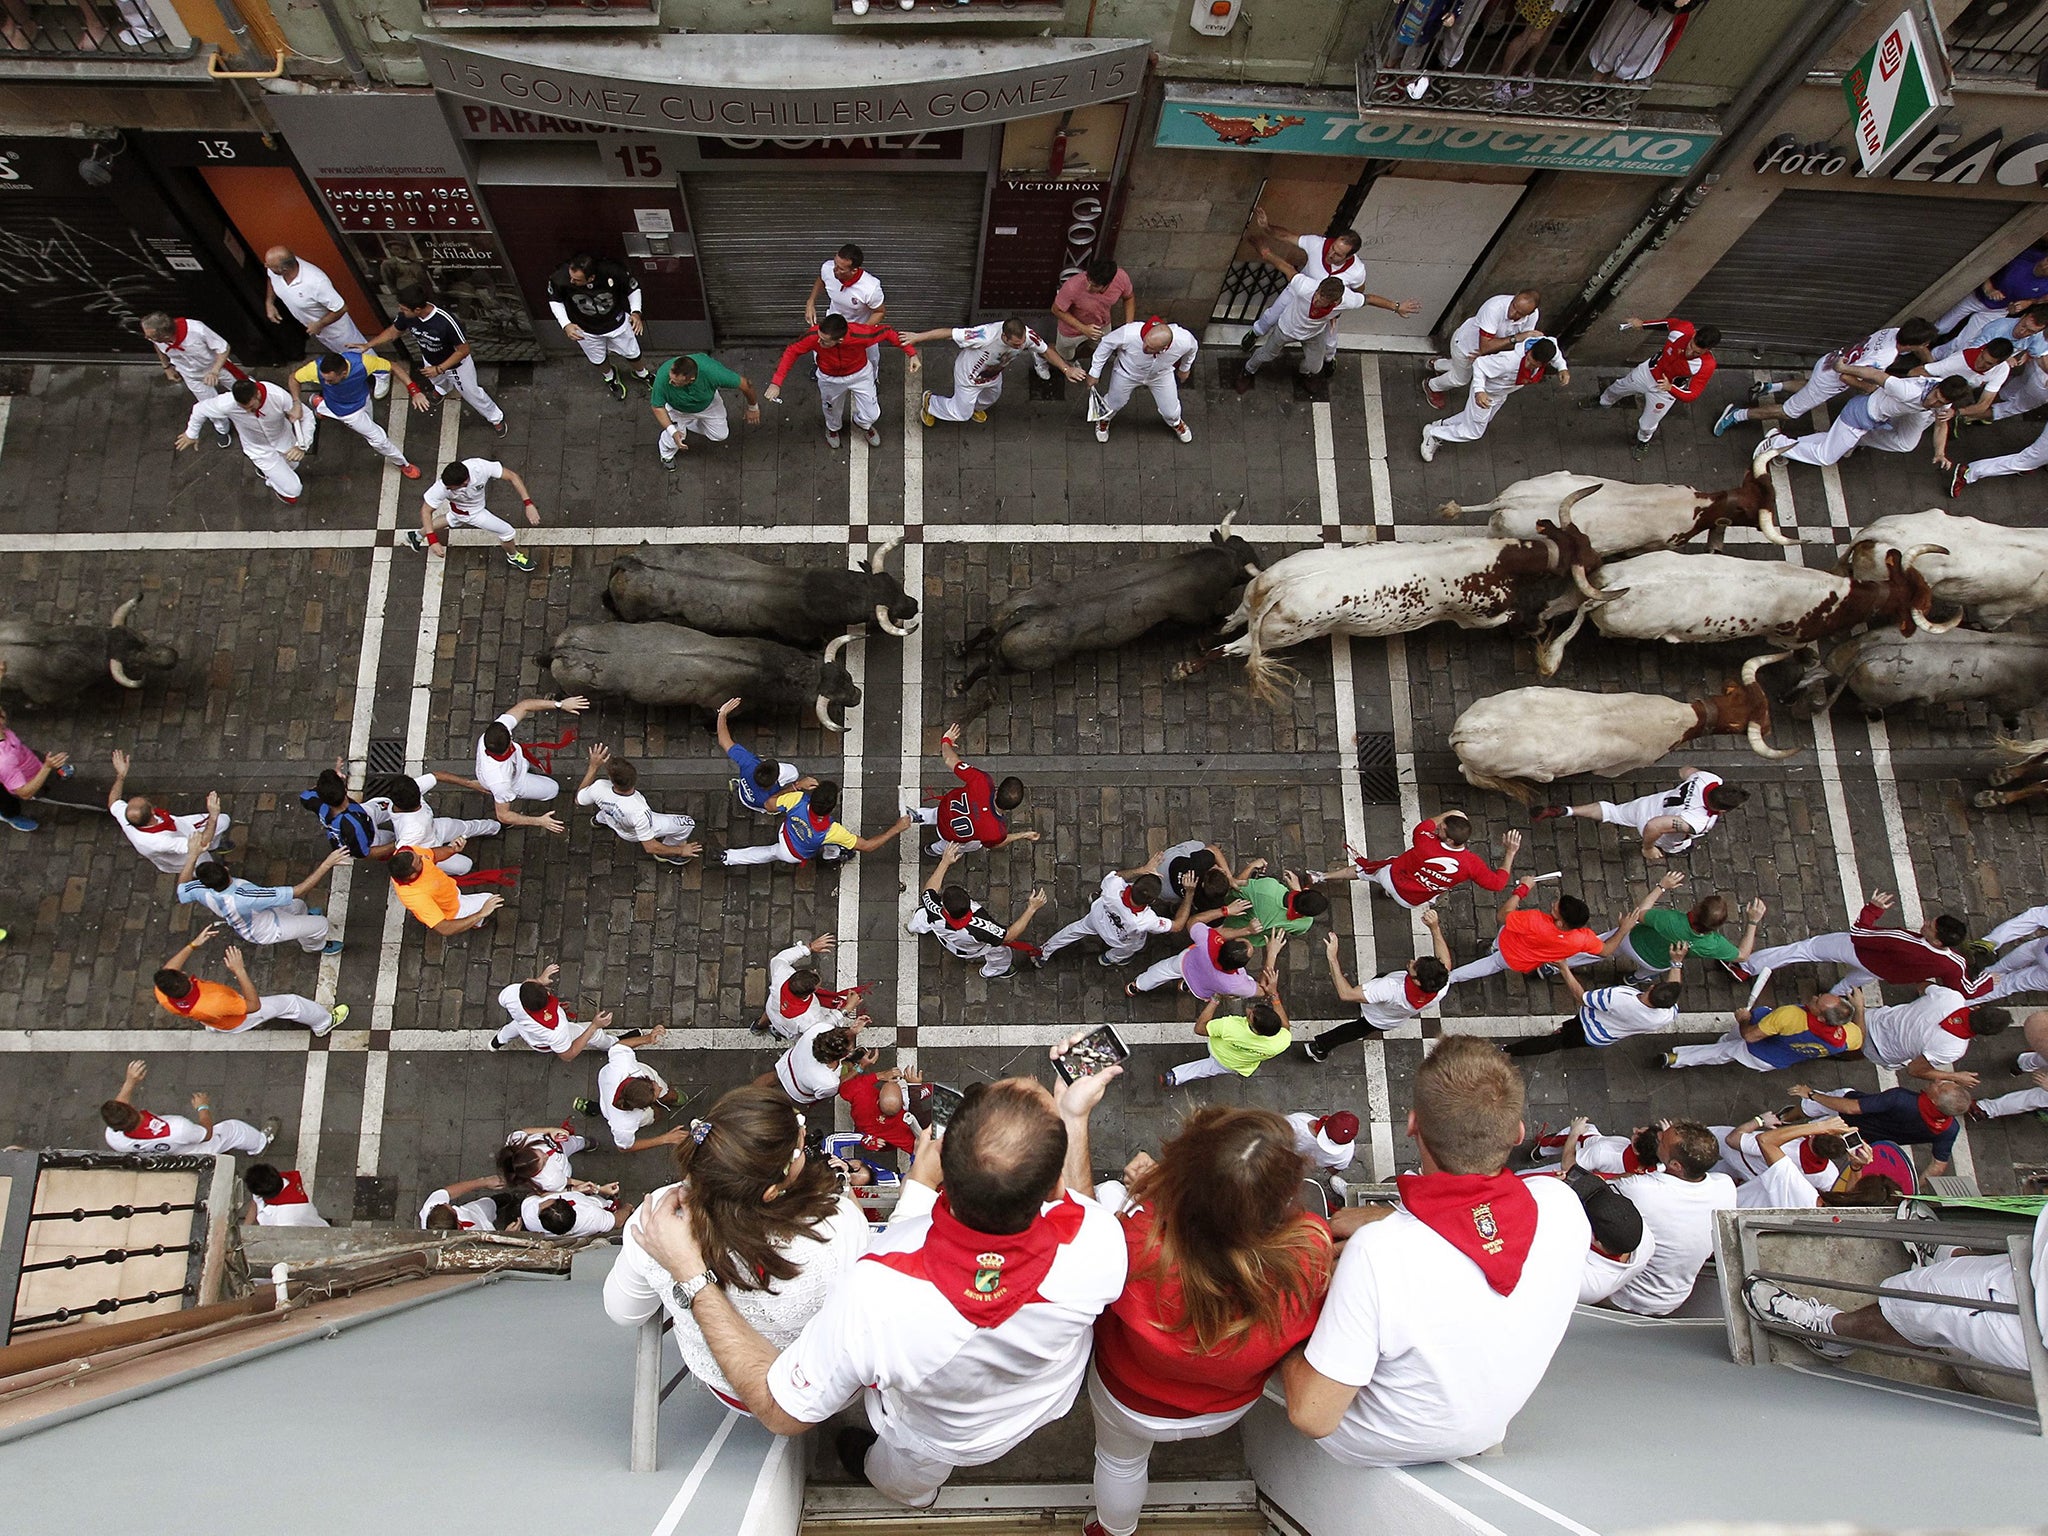 More than 1,000 participants packed the streets of Pamplona's old town